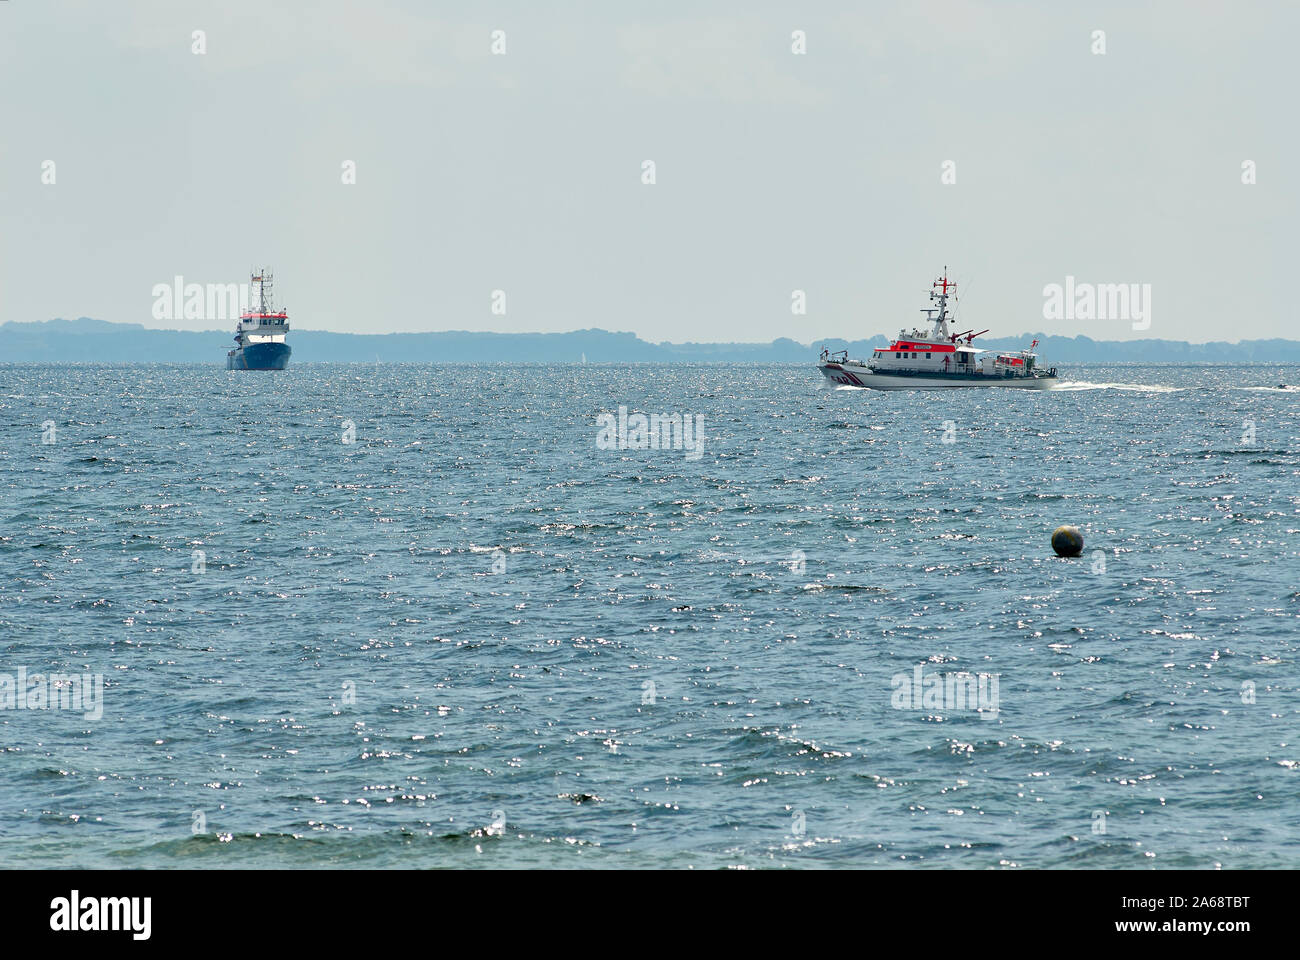 German Coast Guard and Search and Rescue Cruiser in the Bay of Neustadt, Baltic Sea, Germany Stock Photo